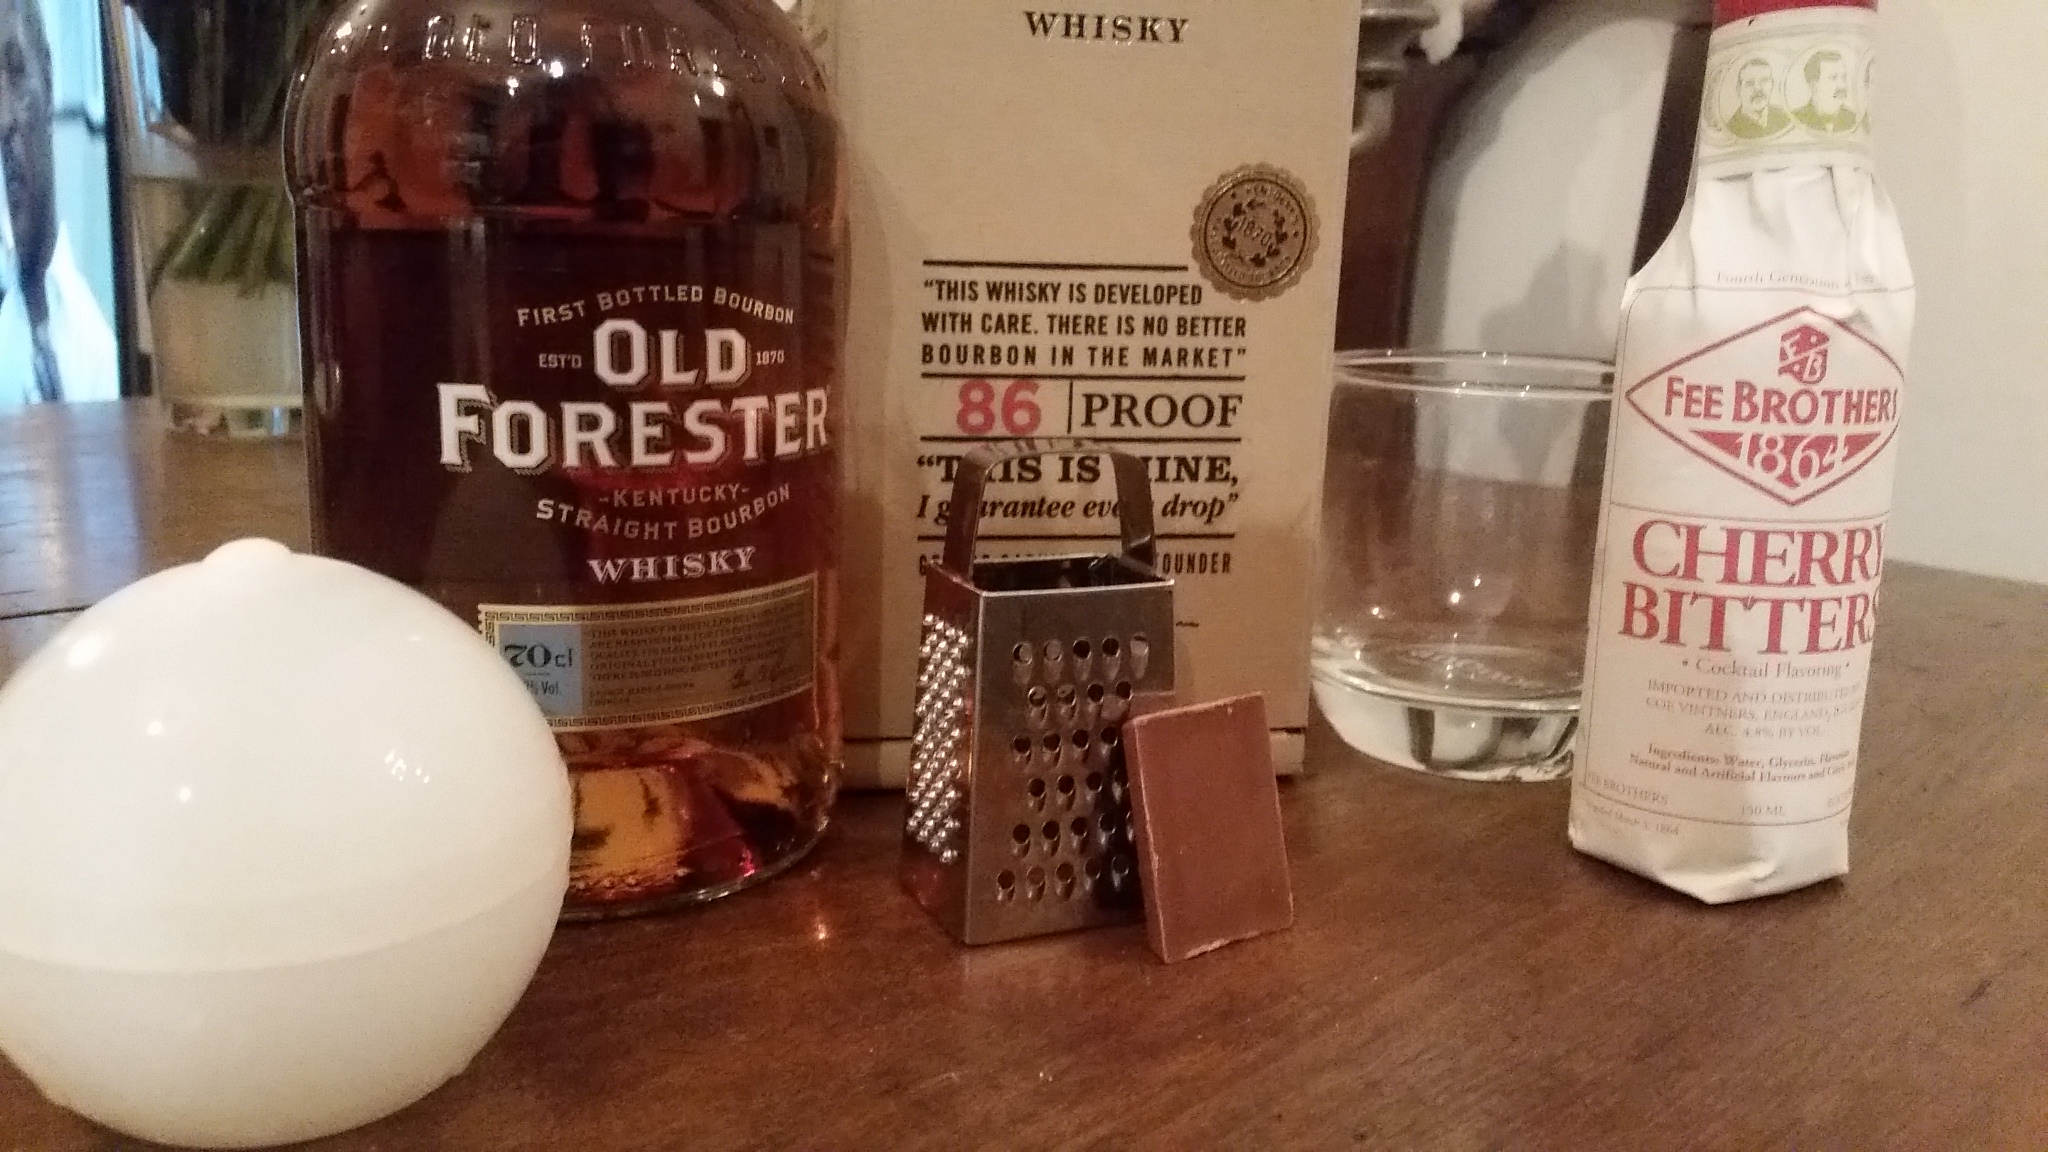 The Old Forester Bourbon Cocktail Challenge